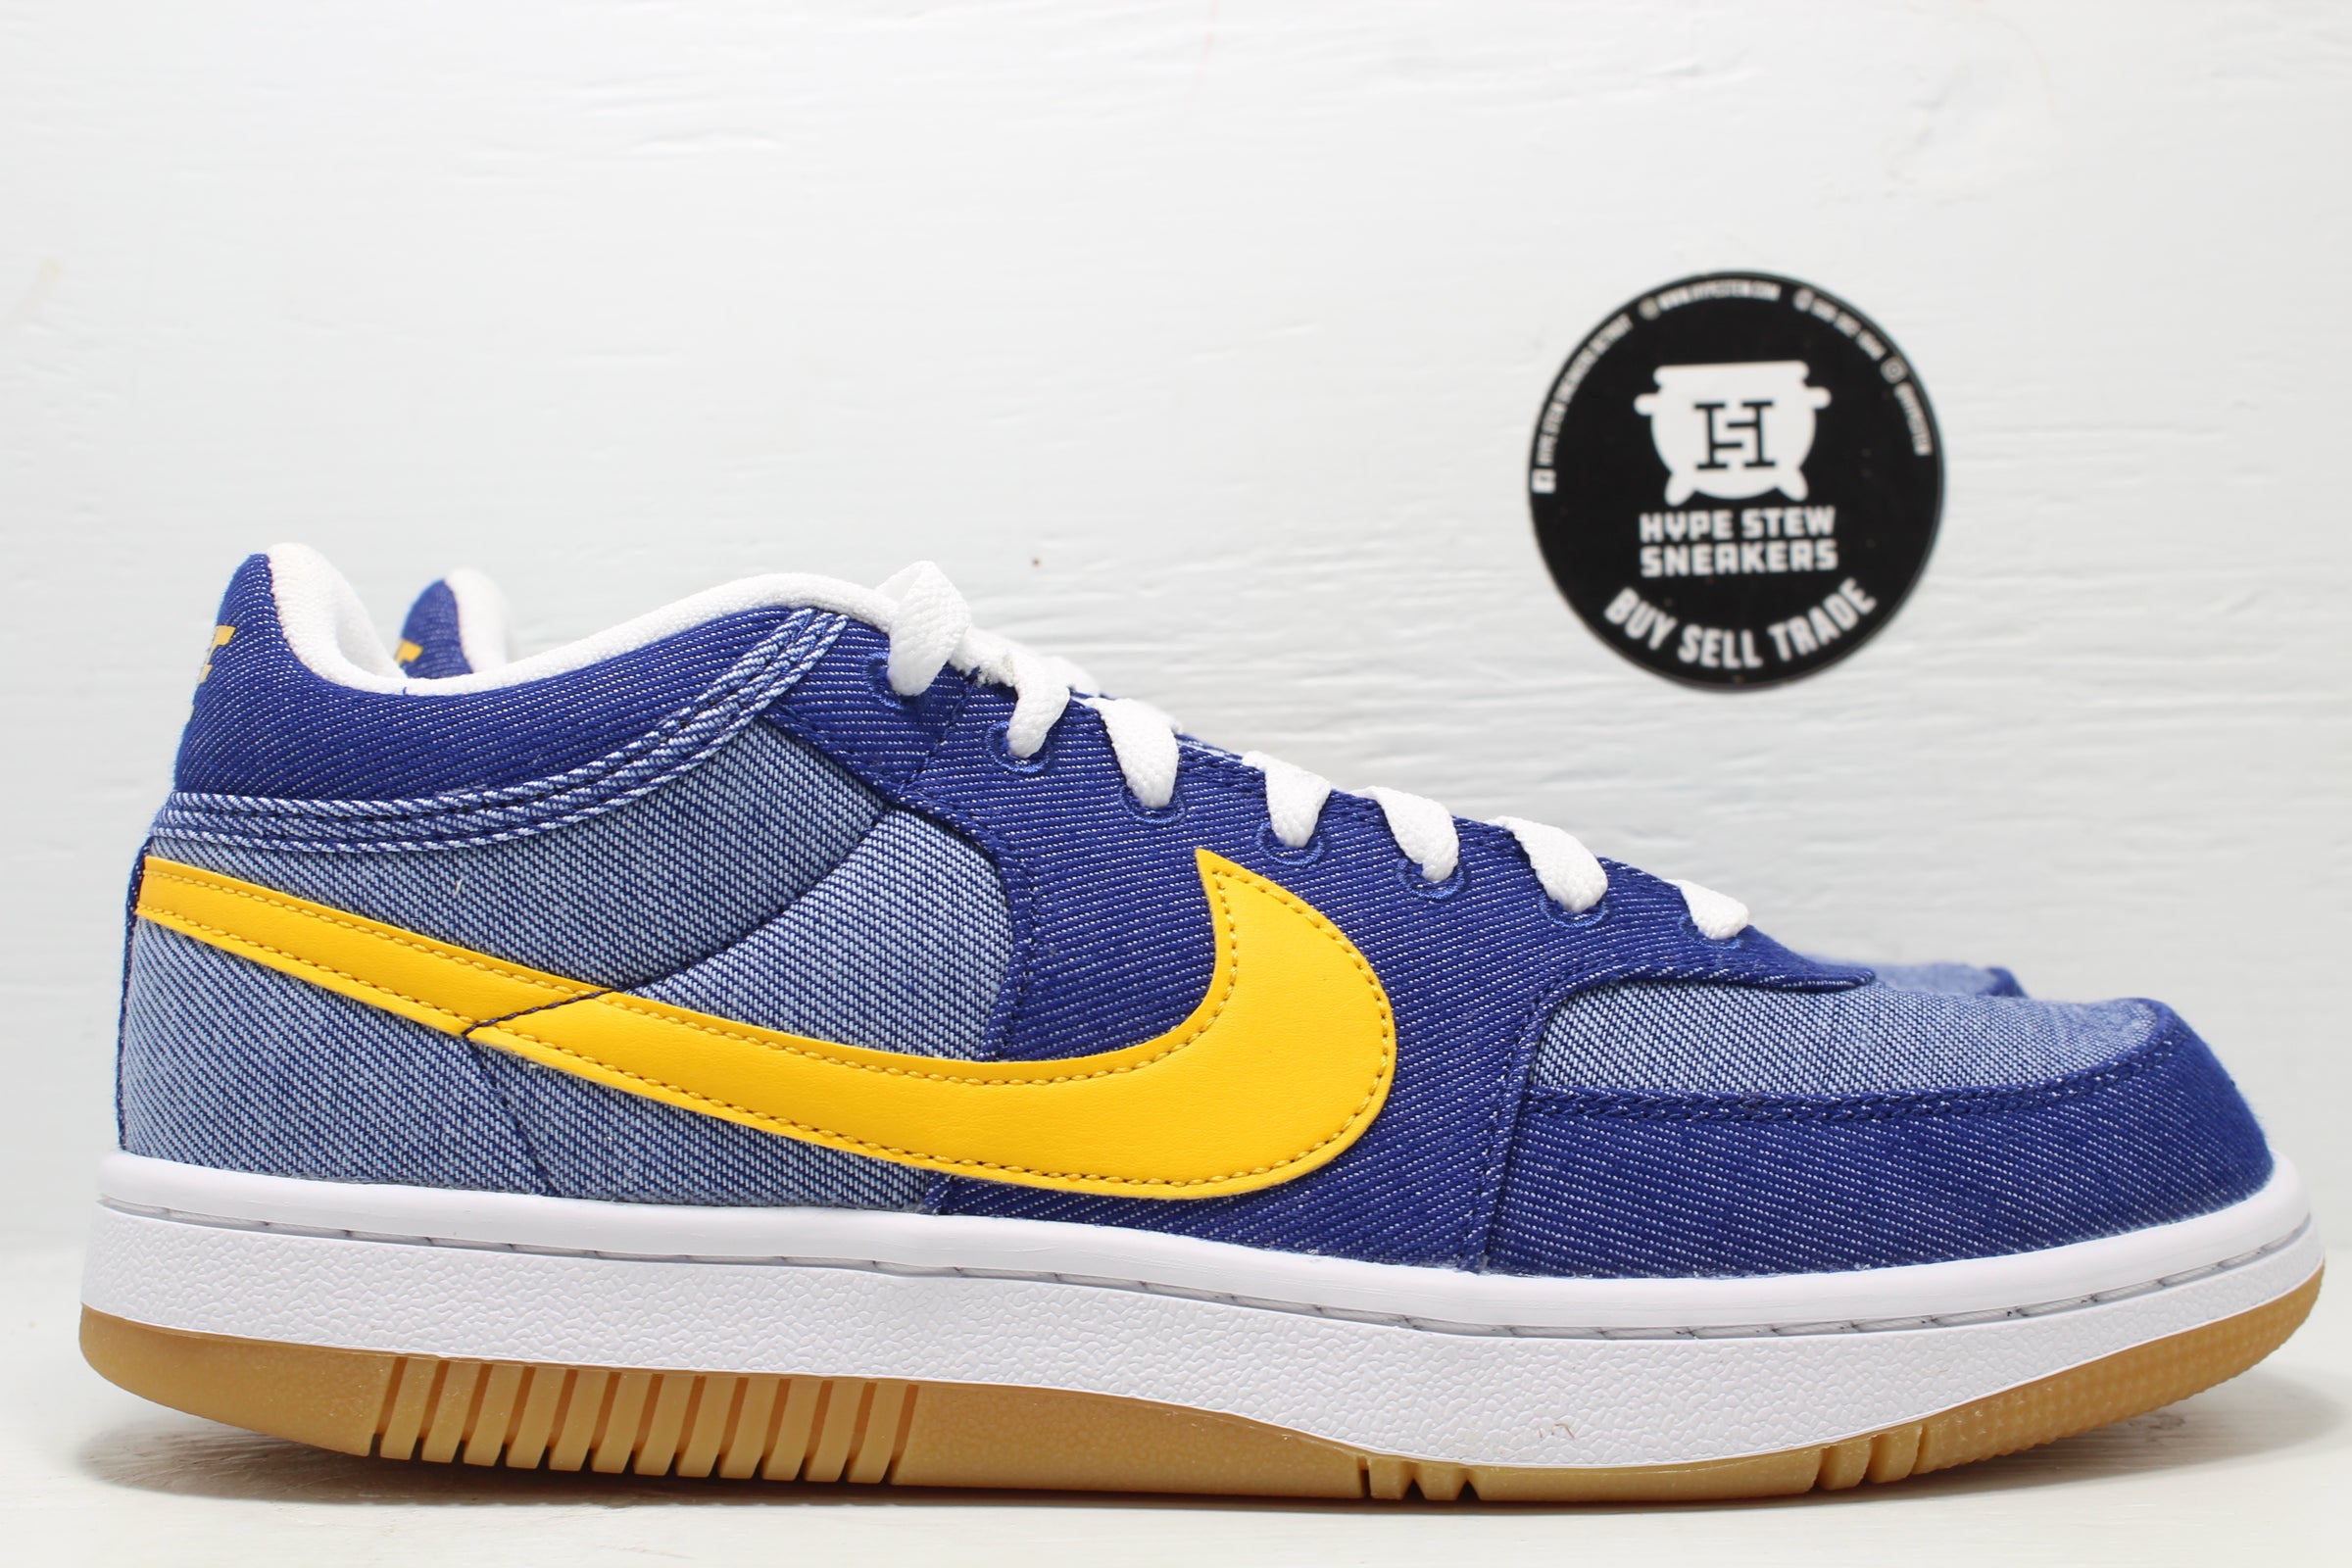 Nike Sky Force 3/4 Golden State Warriors | Hype Stew Sneakers Detroit